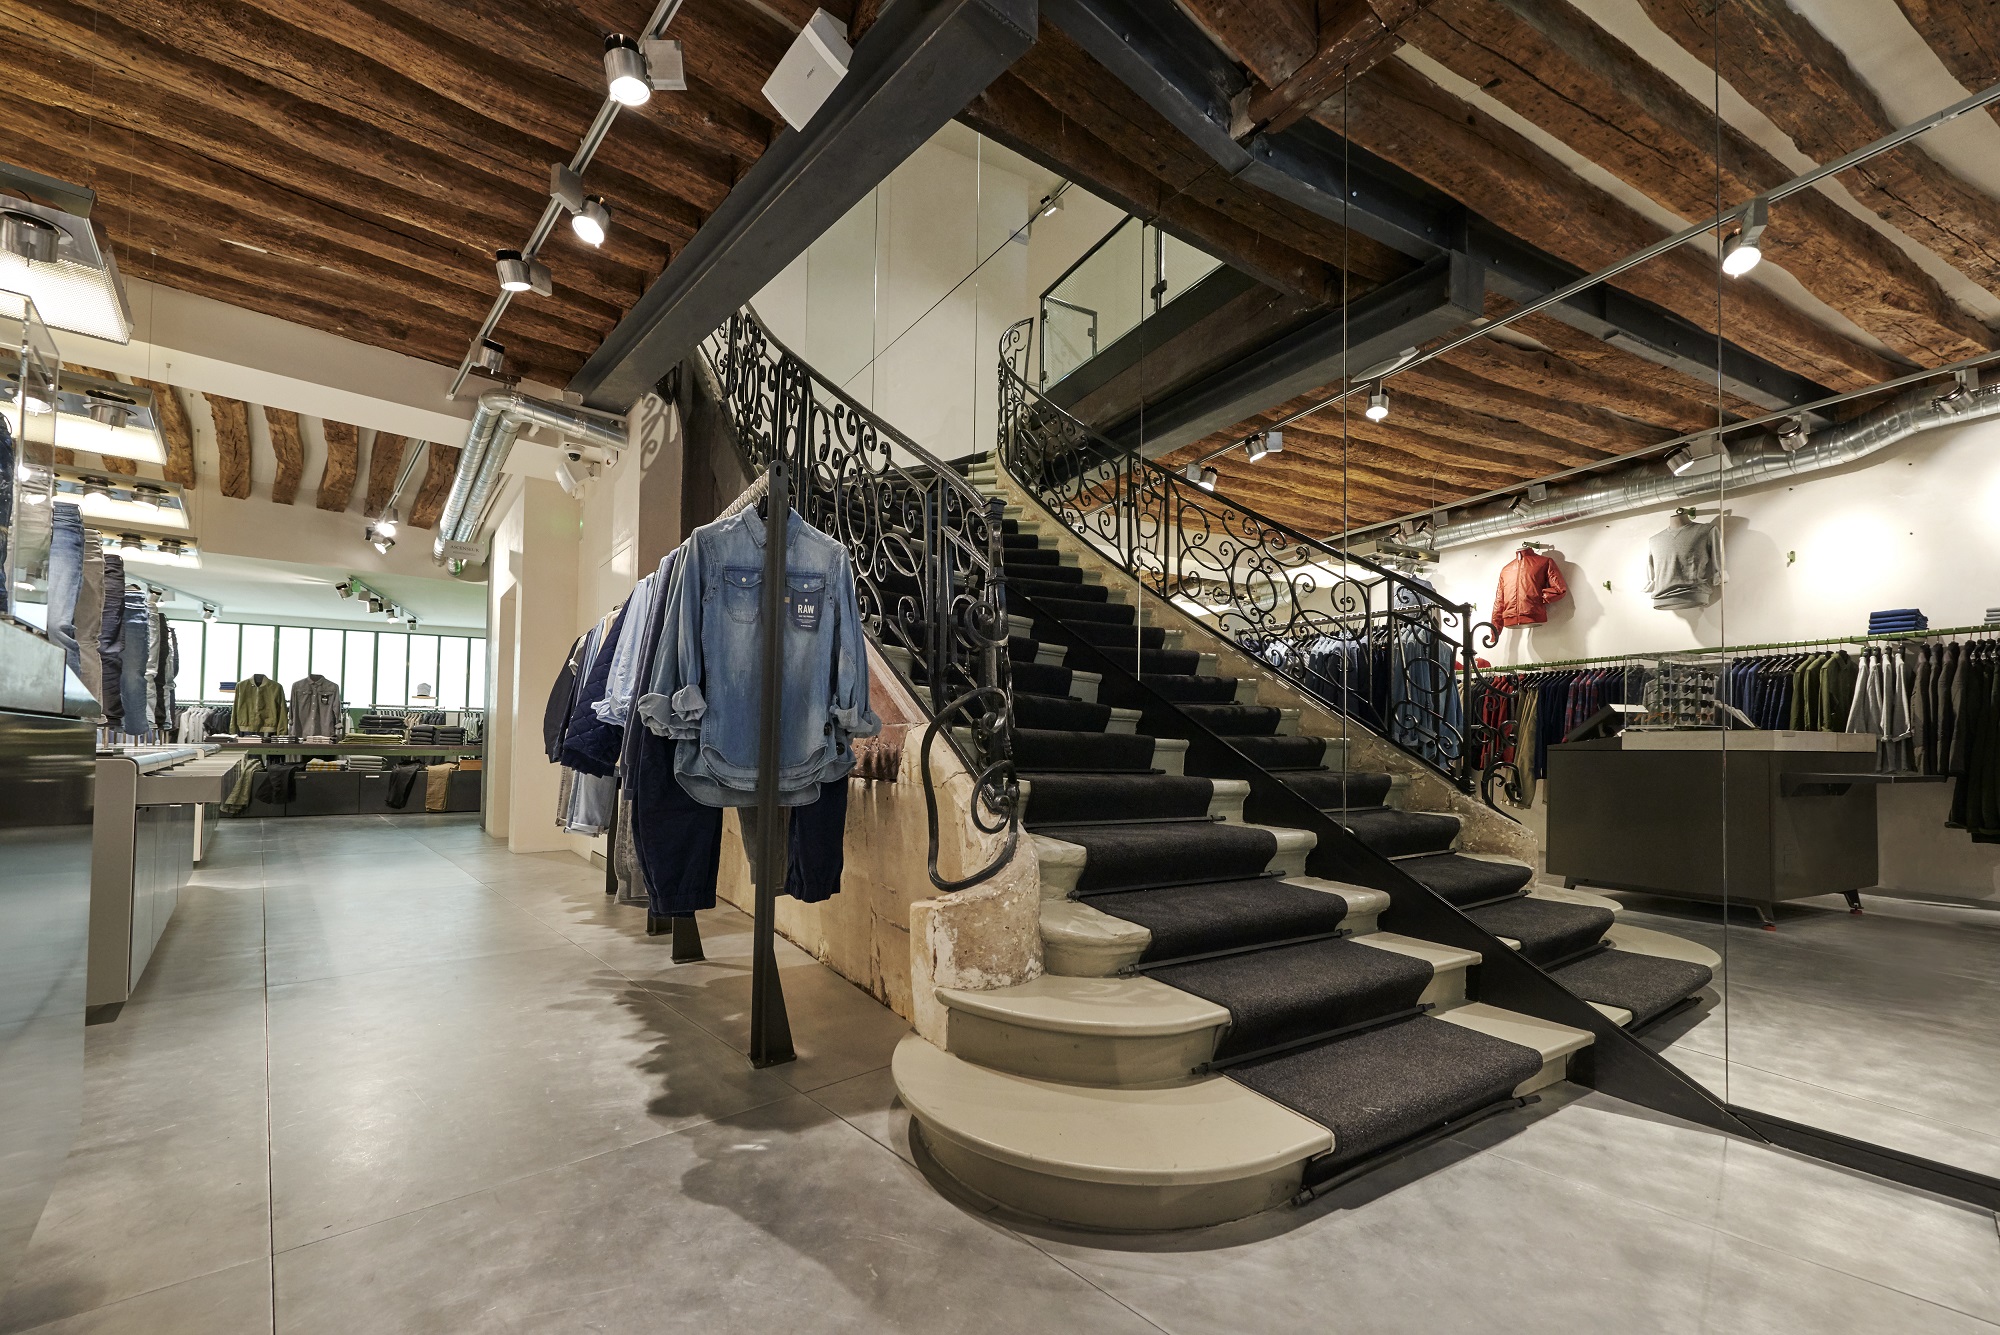 G-Star RAW opens a new boutique in 